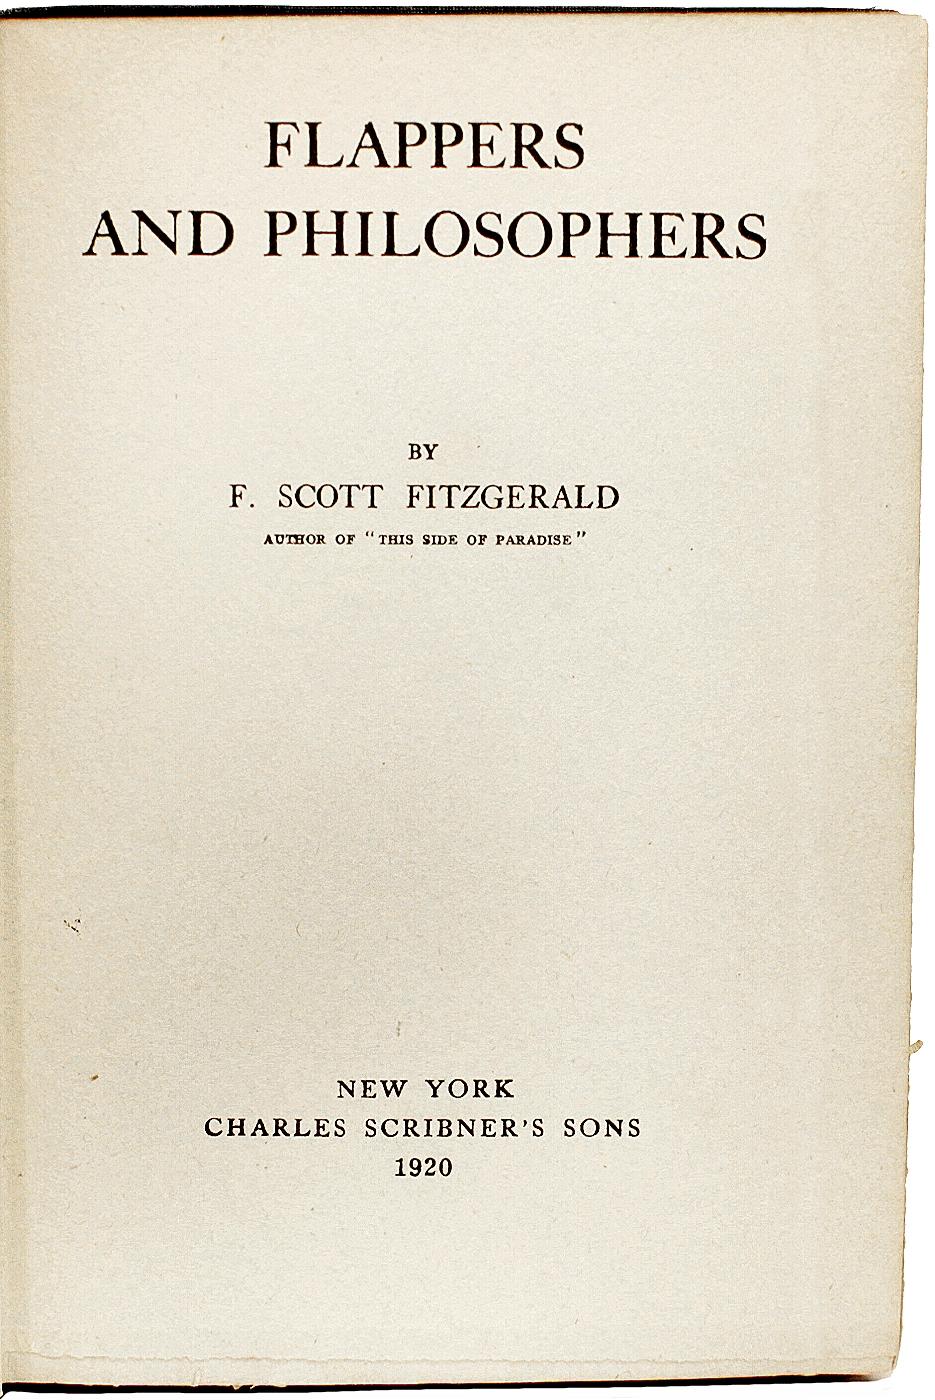 AUTHOR: FITZGERALD, F. Scott. 

TITLE: Flappers And Philosophers.

PUBLISHER: NY: Charles Scribner's Sons, 1920.

DESCRIPTION: FIRST EDITION. 1 vol., stated Sept. 1920, bound in the publishers original gilt and blind stamped green cloth.

CONDITION: